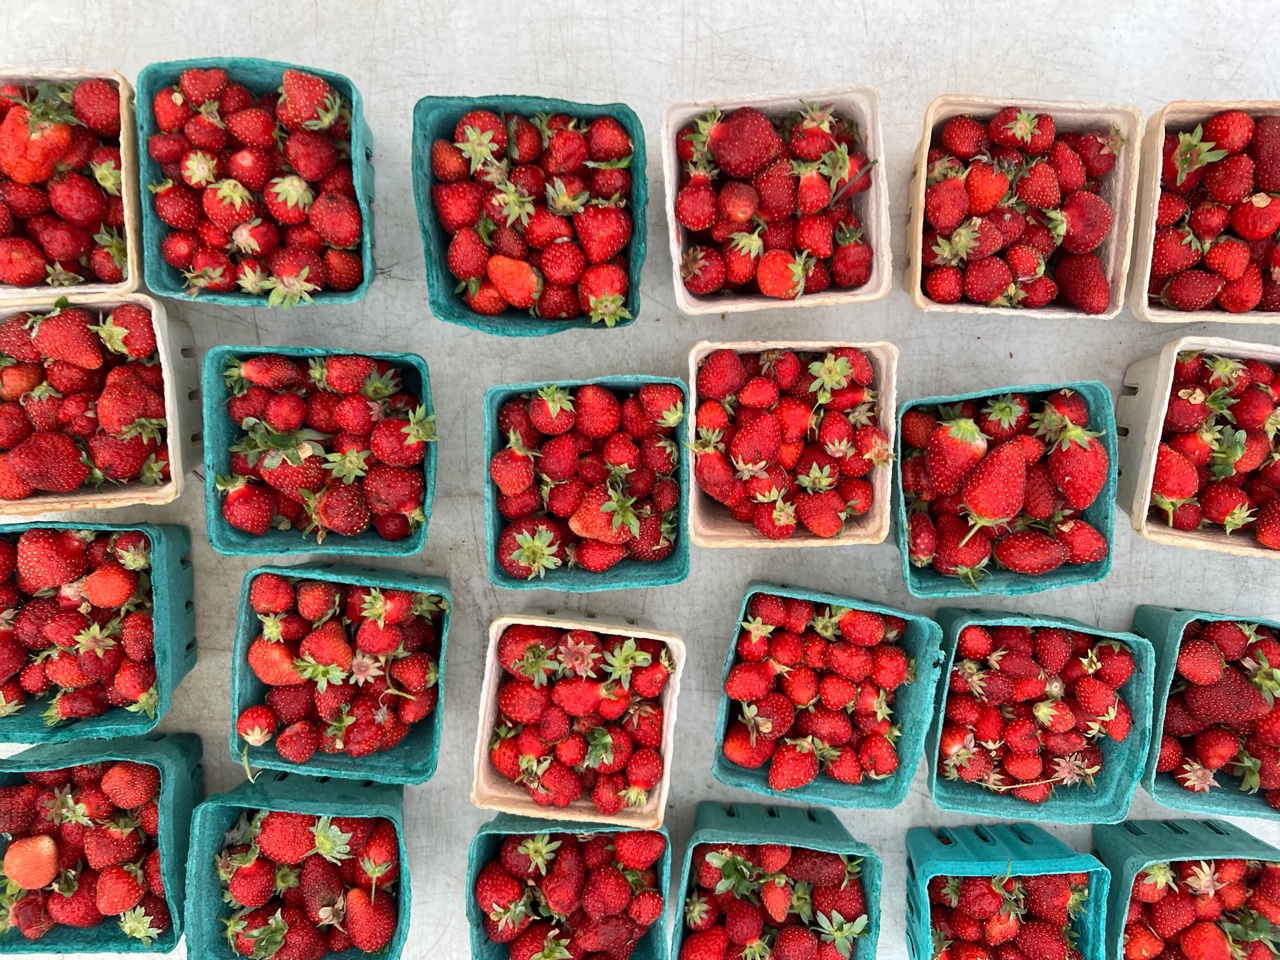 On a white folding table at the Urbana Market at the Square, several square paper cartons hold bright red Illinois-grown strawberries. Photo by Alyssa Buckley.